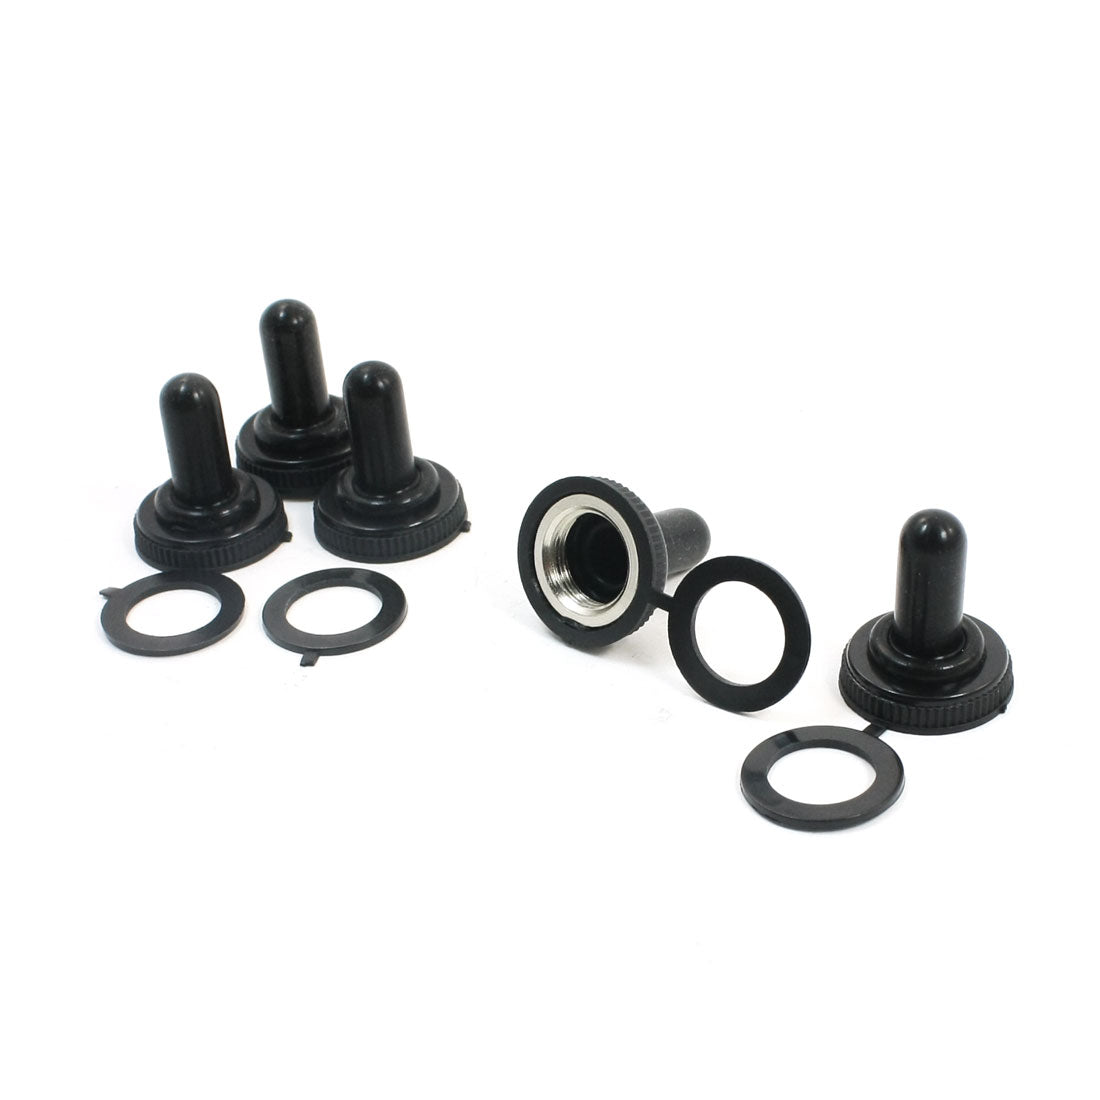 uxcell Uxcell 5 Pcs 18mm Dia Female Thread Black Rubber Waterproof Water Proof Toggle Switch Cover Cap Boot Replacement